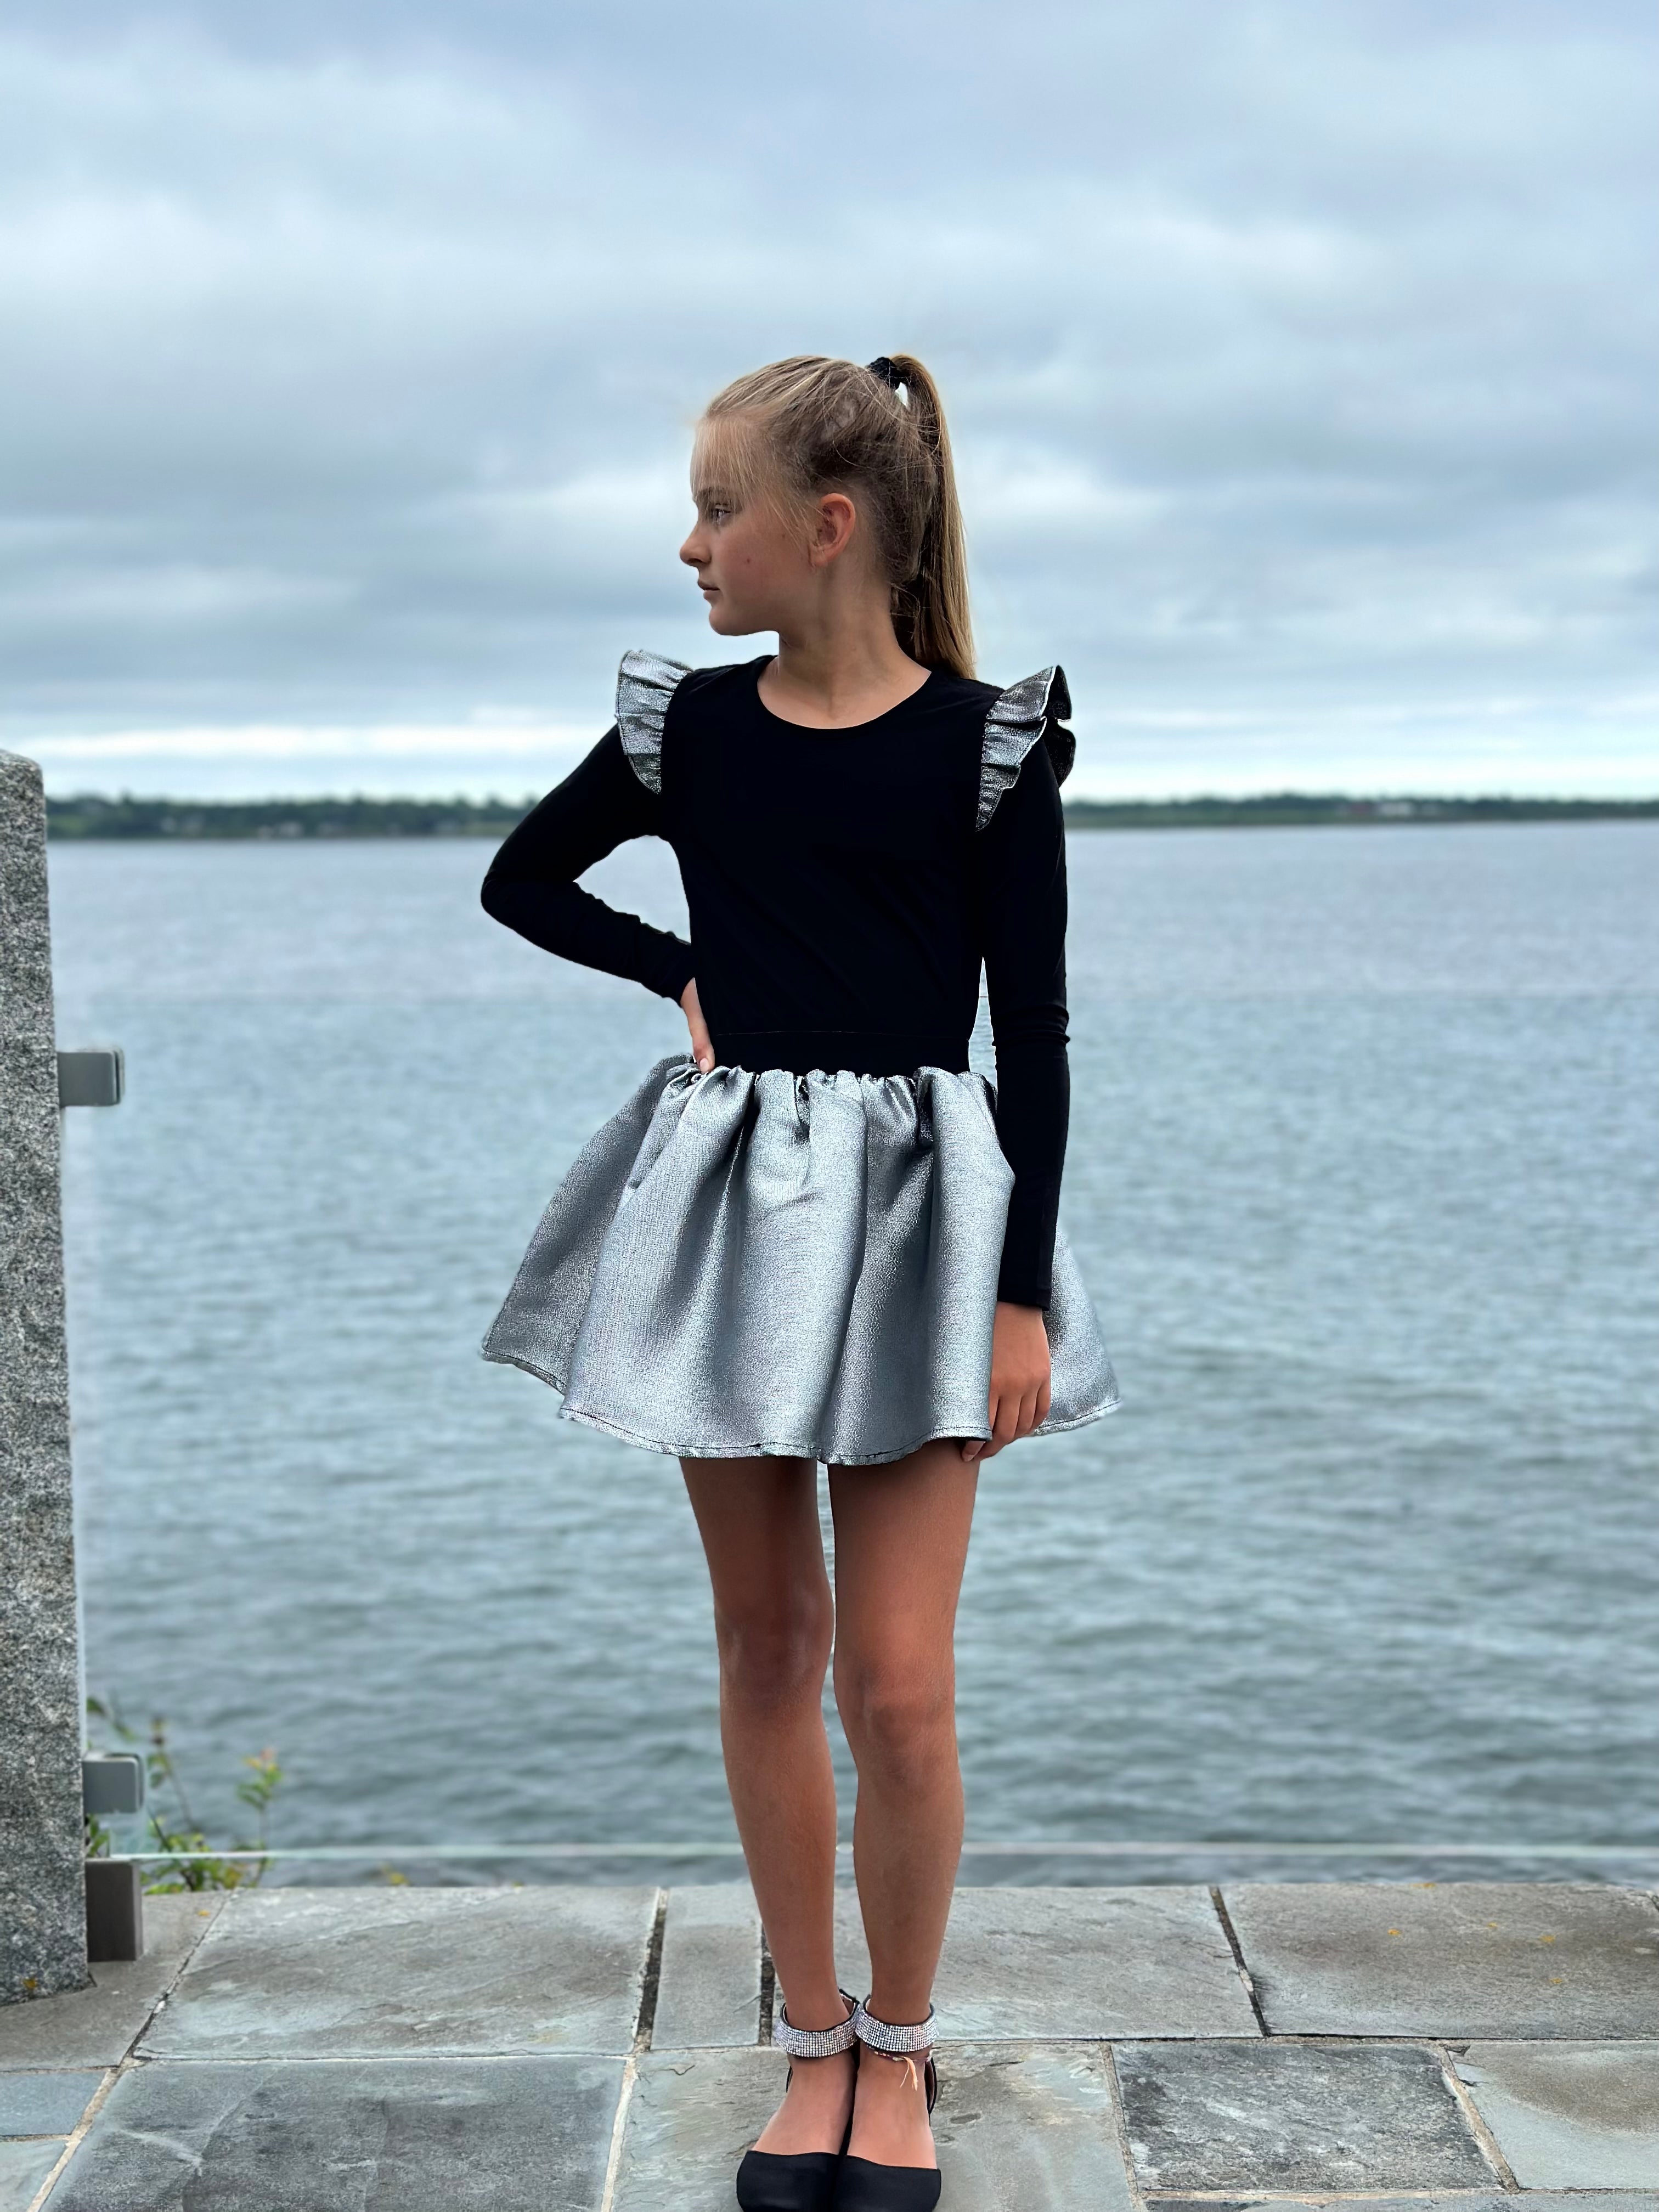 Silver Gathered Skirt FW23